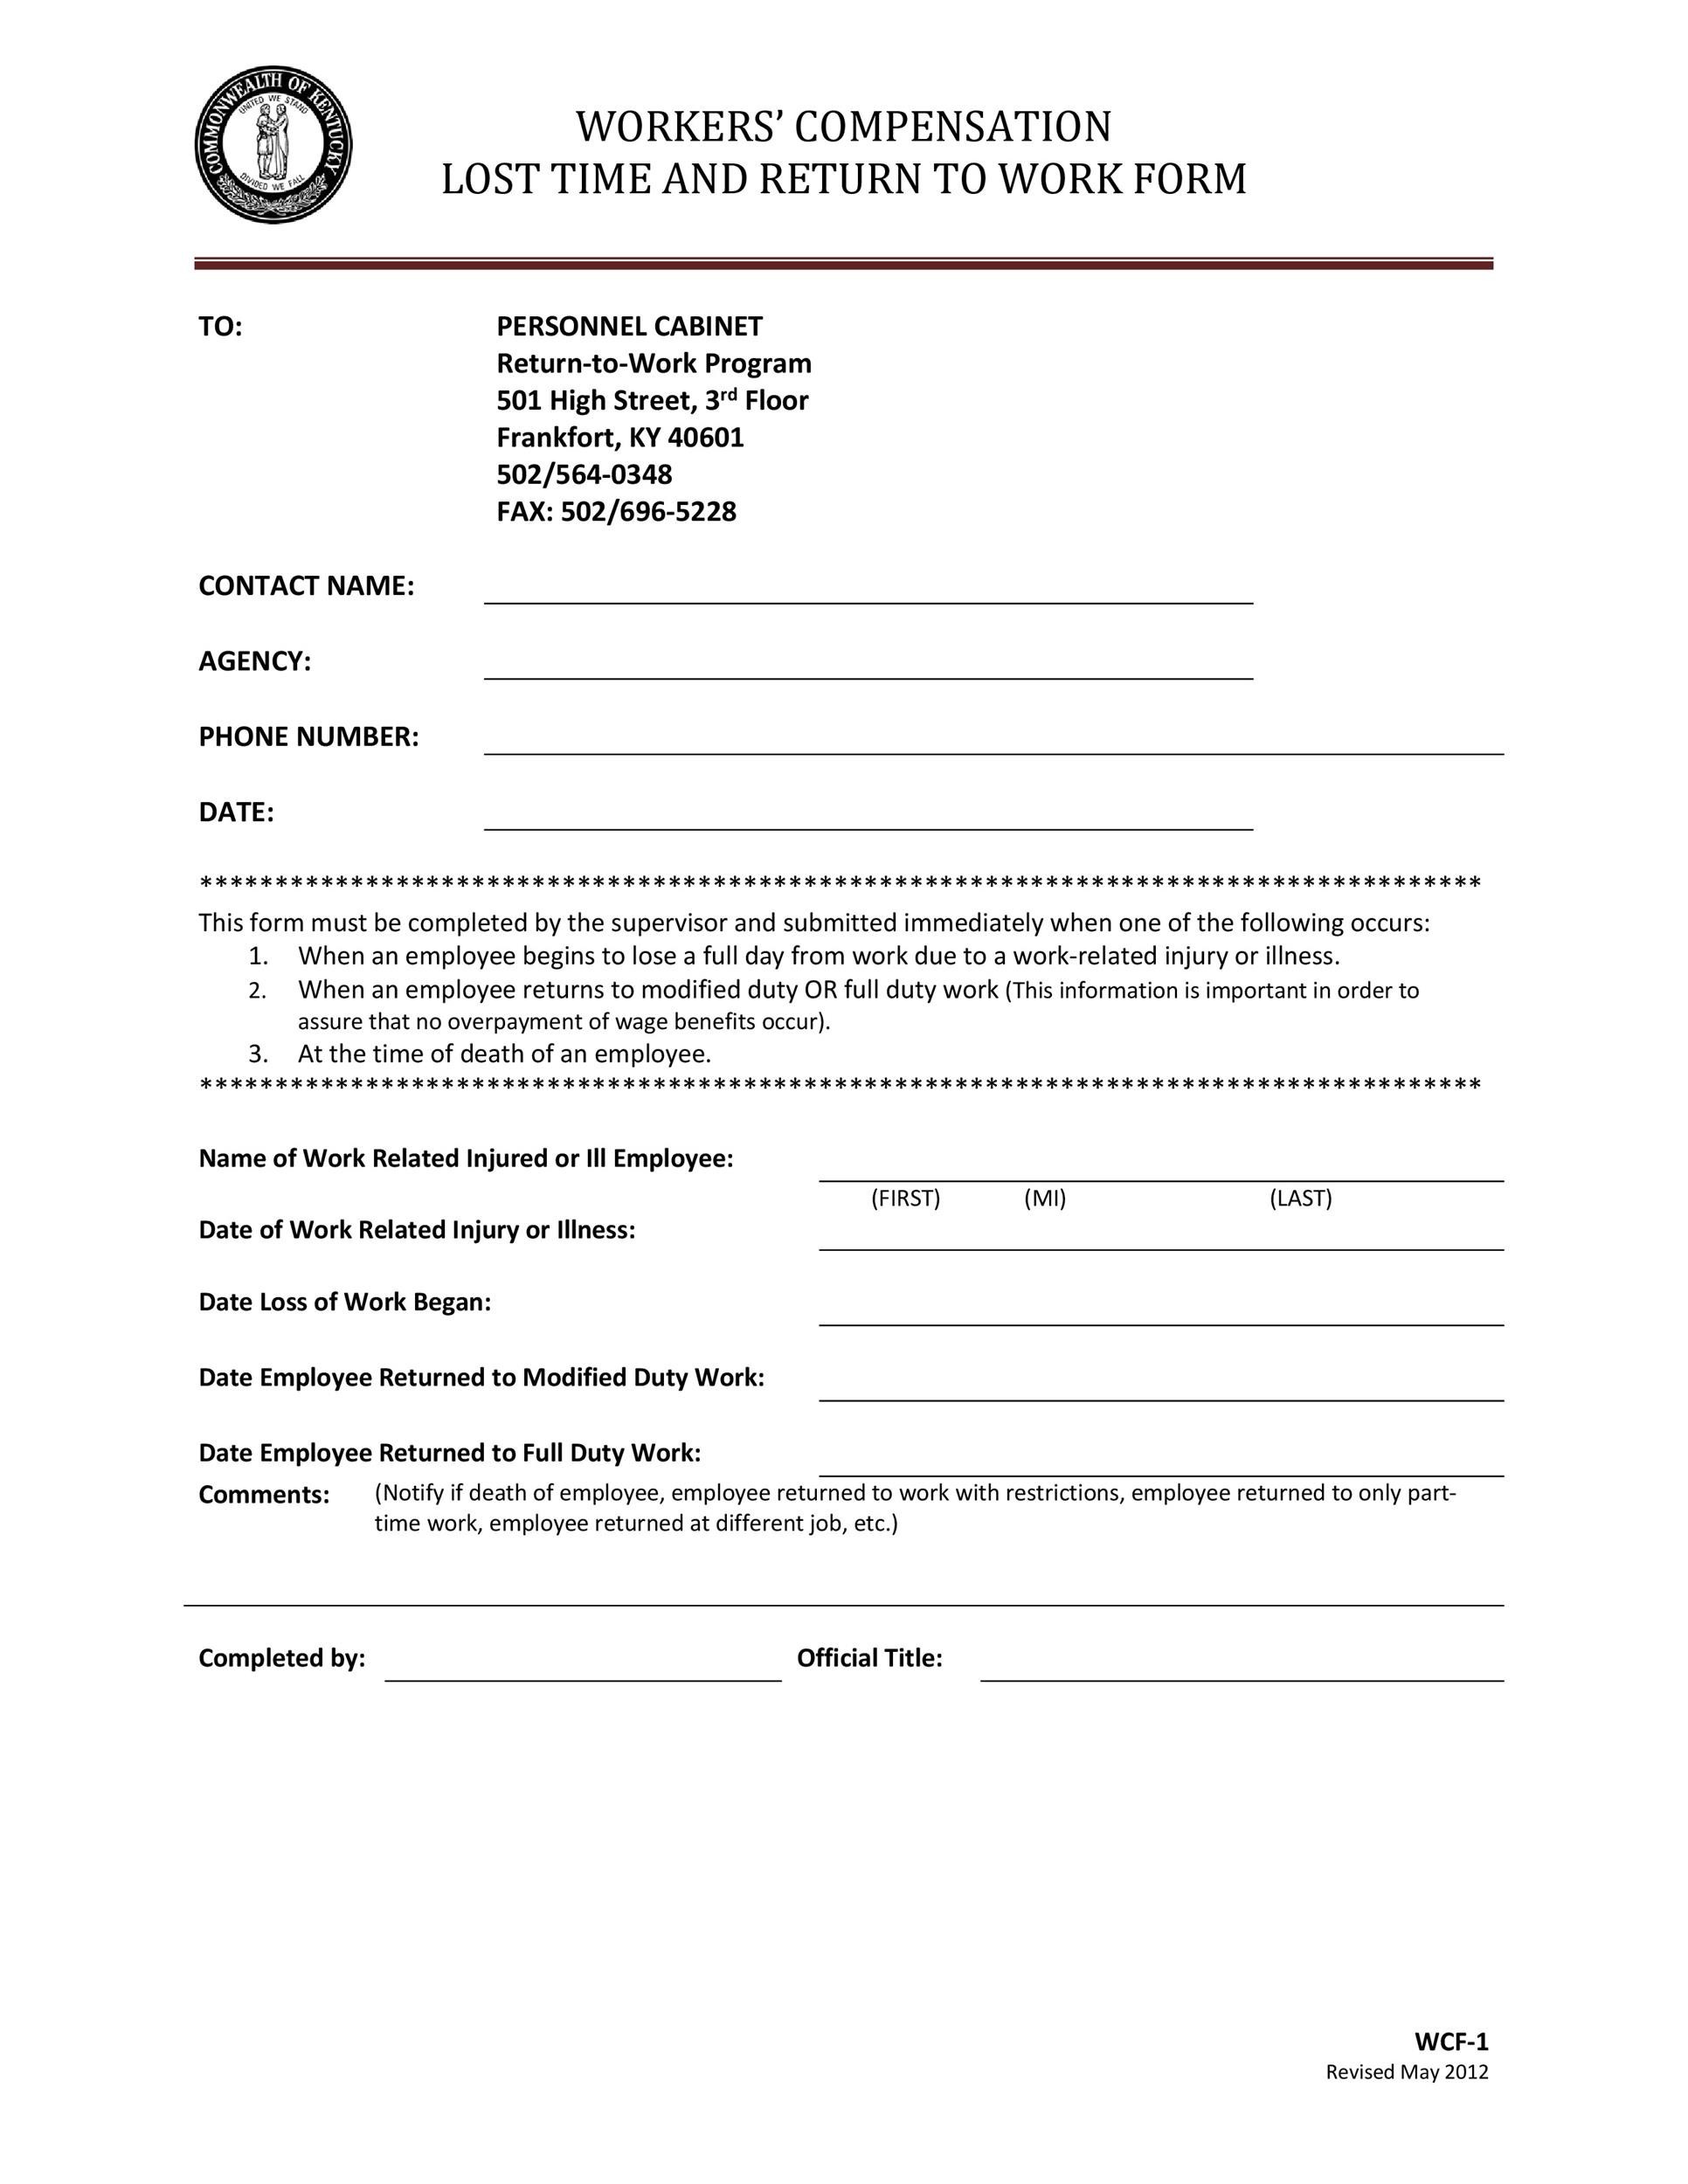 return-to-work-medical-form-2-free-templates-in-pdf-word-excel-download